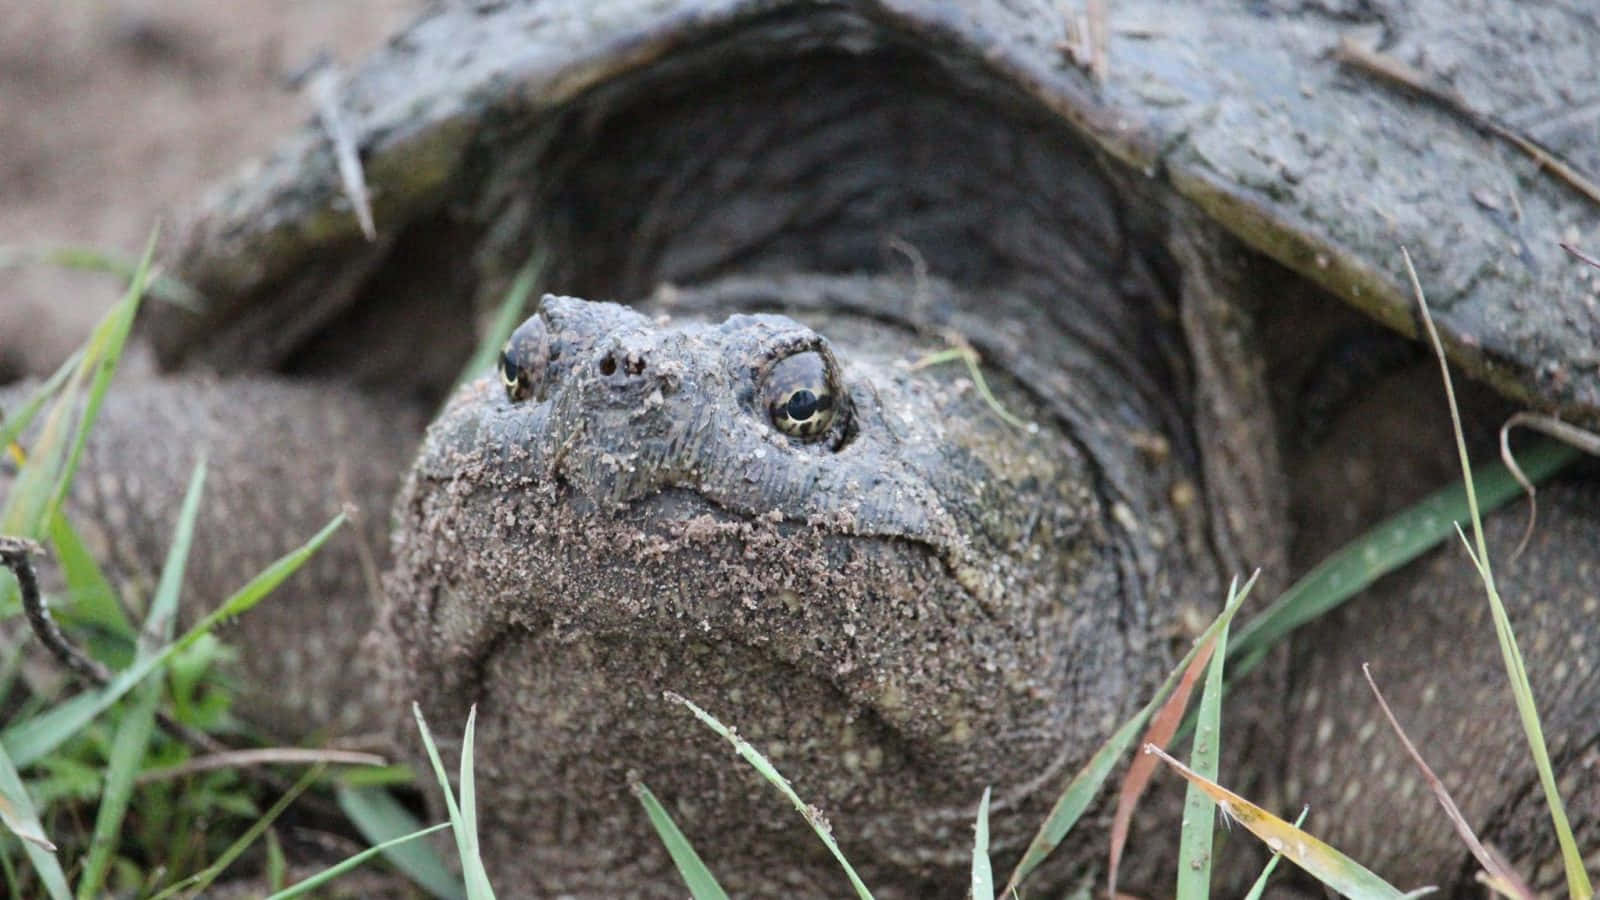 Snapping Turtle Up Close.jpg Wallpaper